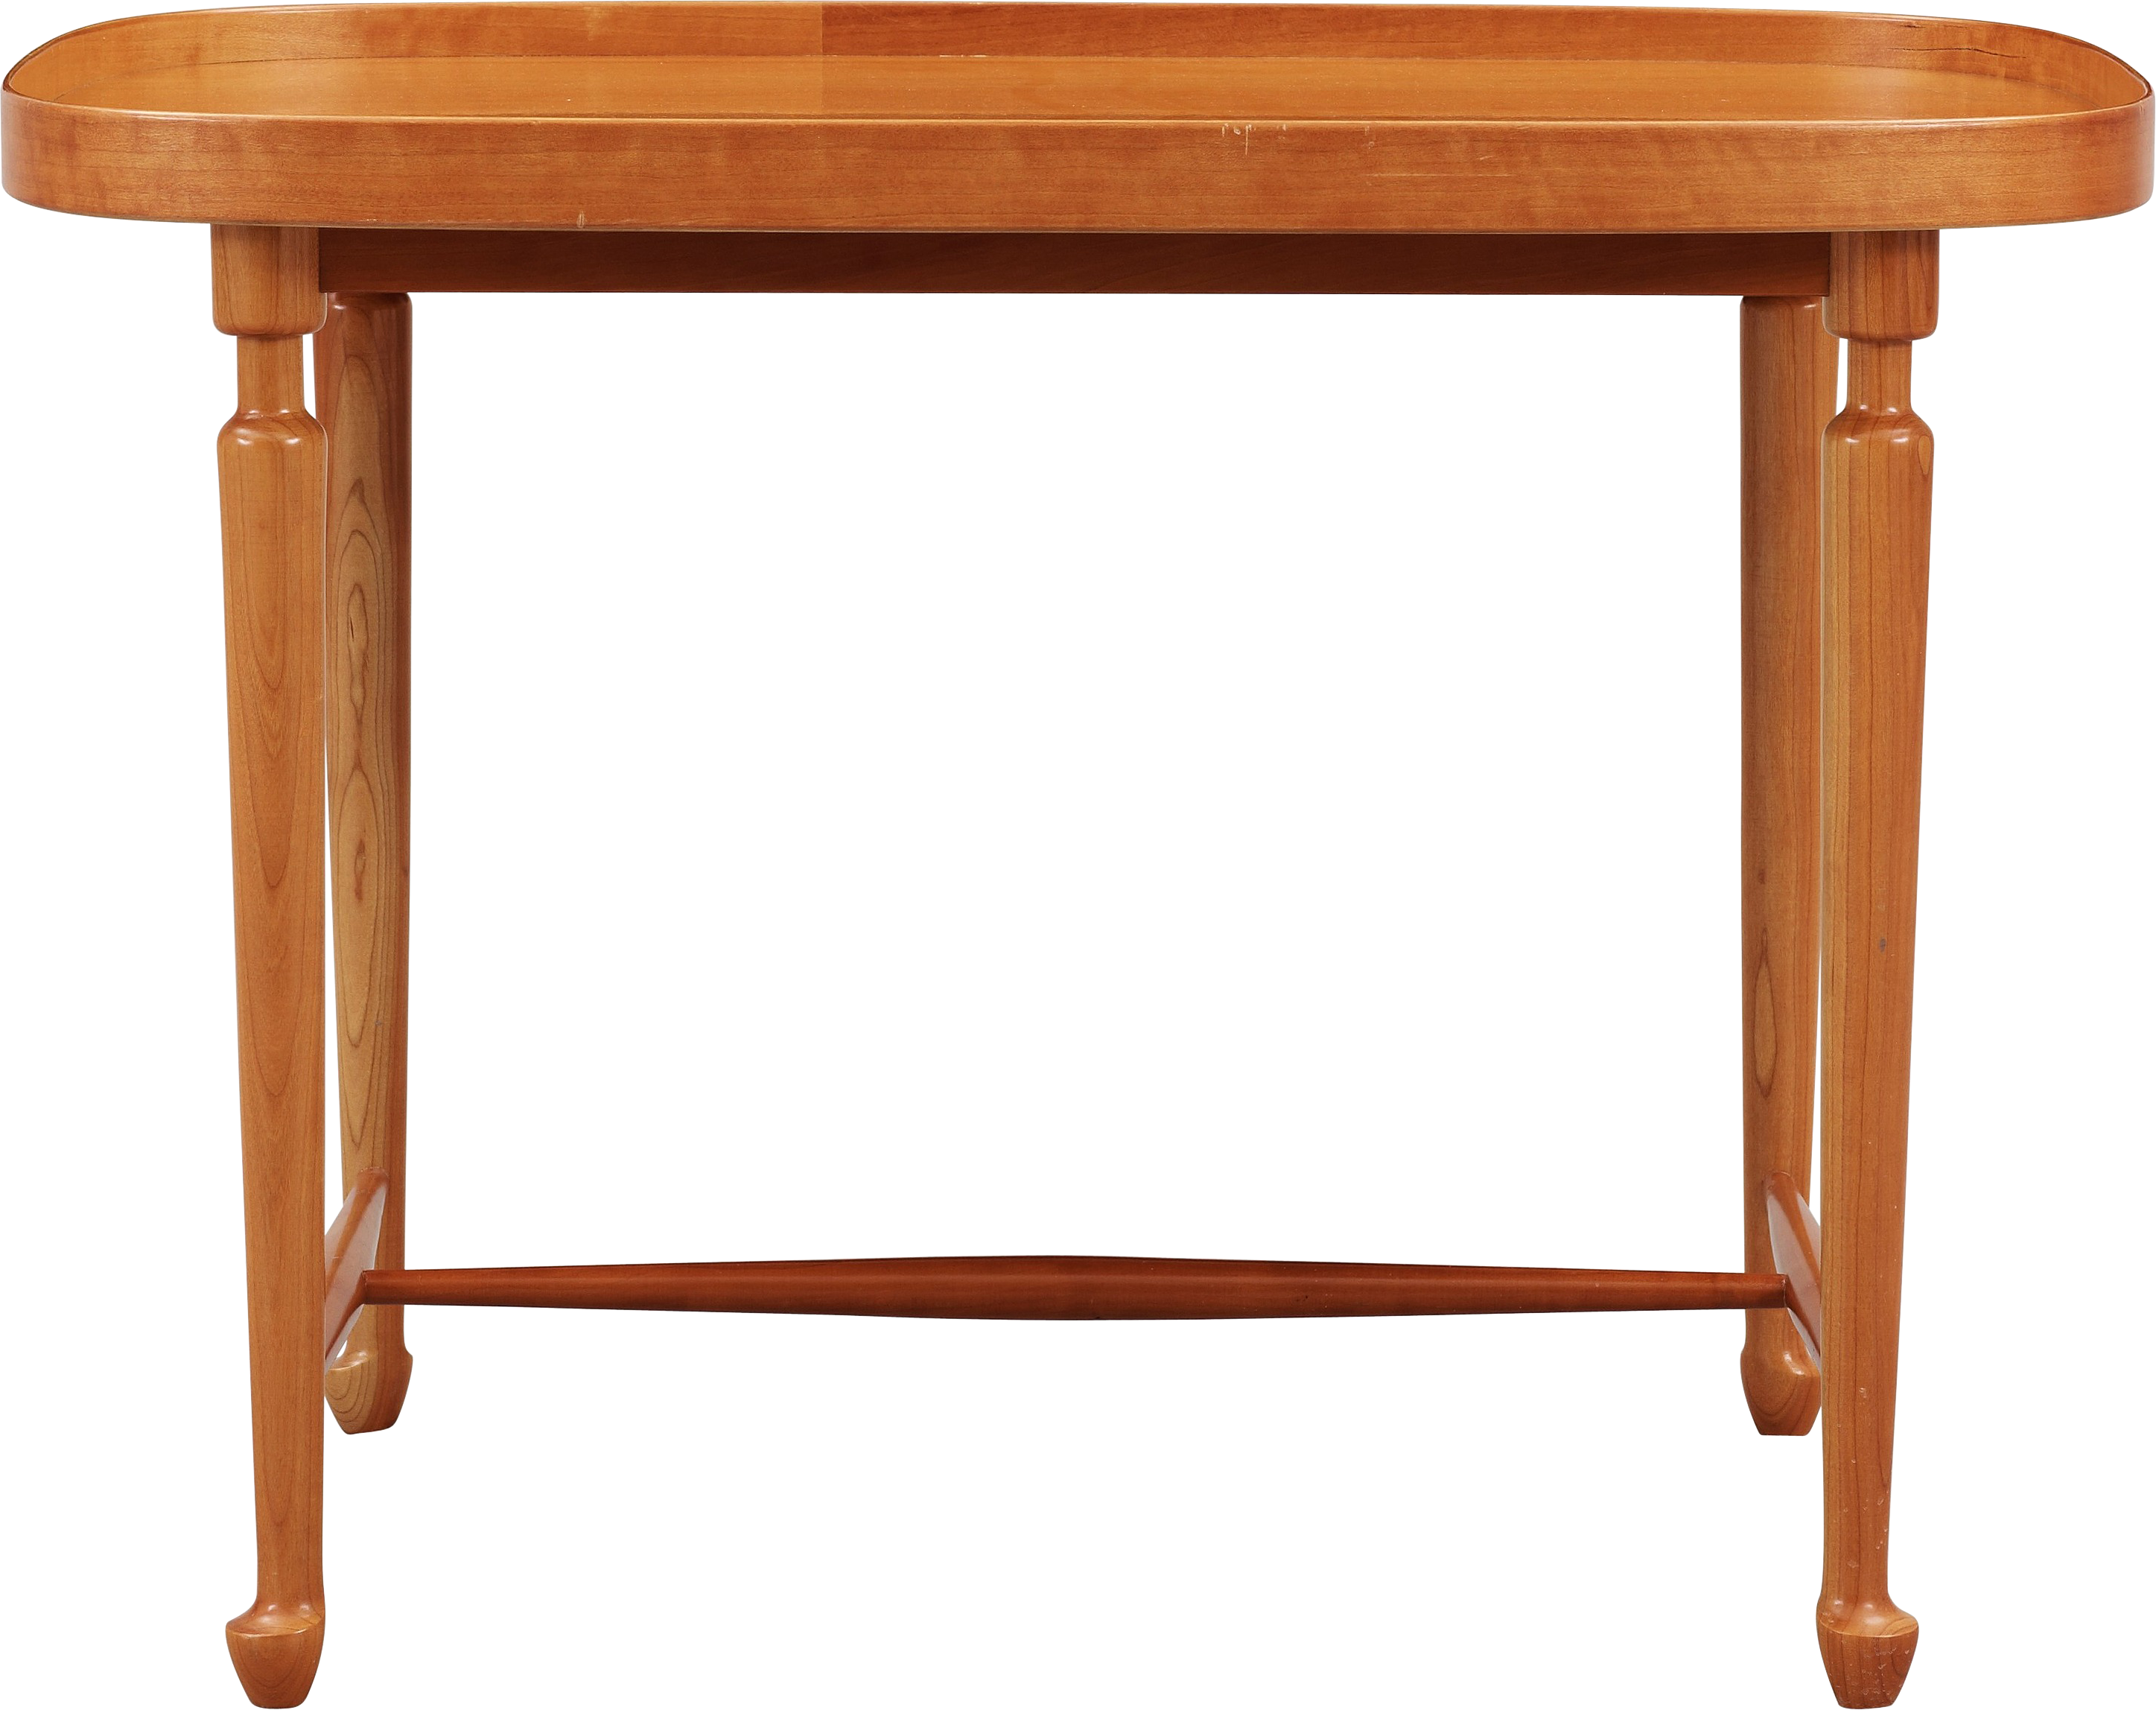 Table Png Image Transparent Image Download, Size: 2895x2296px Throughout Transparent Side Tables For Living Rooms (View 20 of 20)